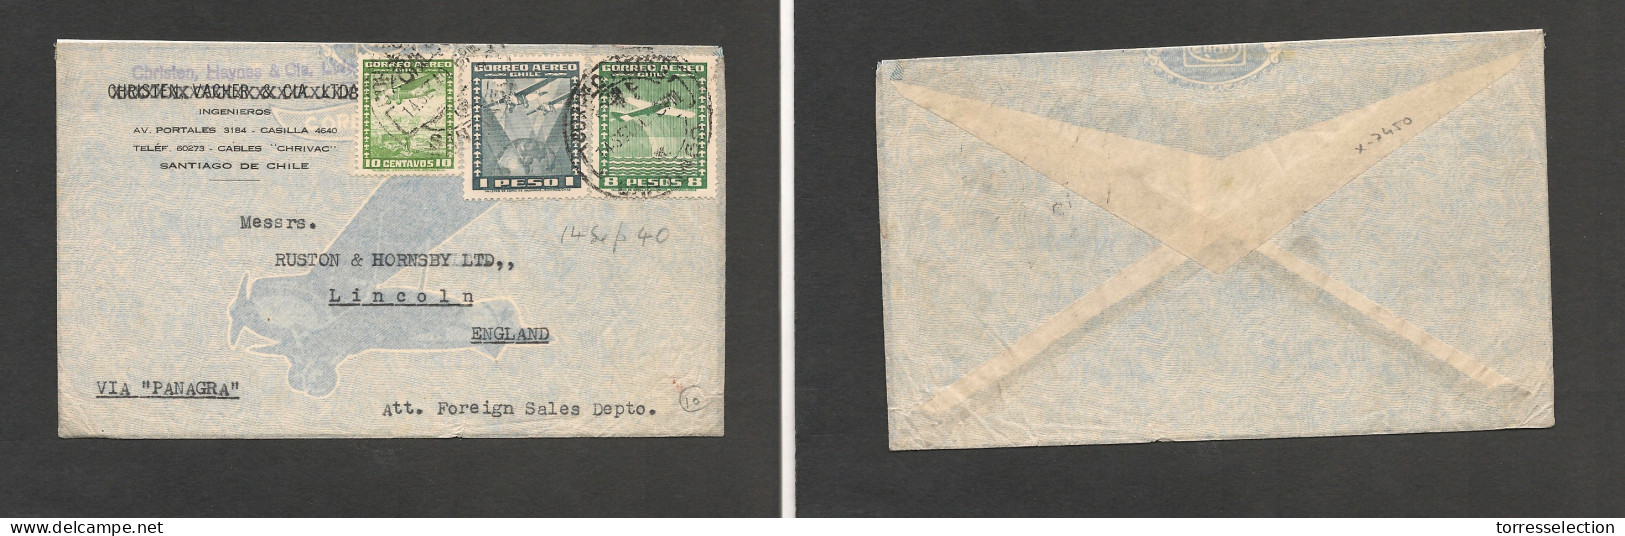 CHILE. Chile - Cover - 1940 17 July Stgo To UK Lincoln Air Mult Fkd Env 9.10 Rate Via Panagra And NY Sea Crossing, Fine. - Chili